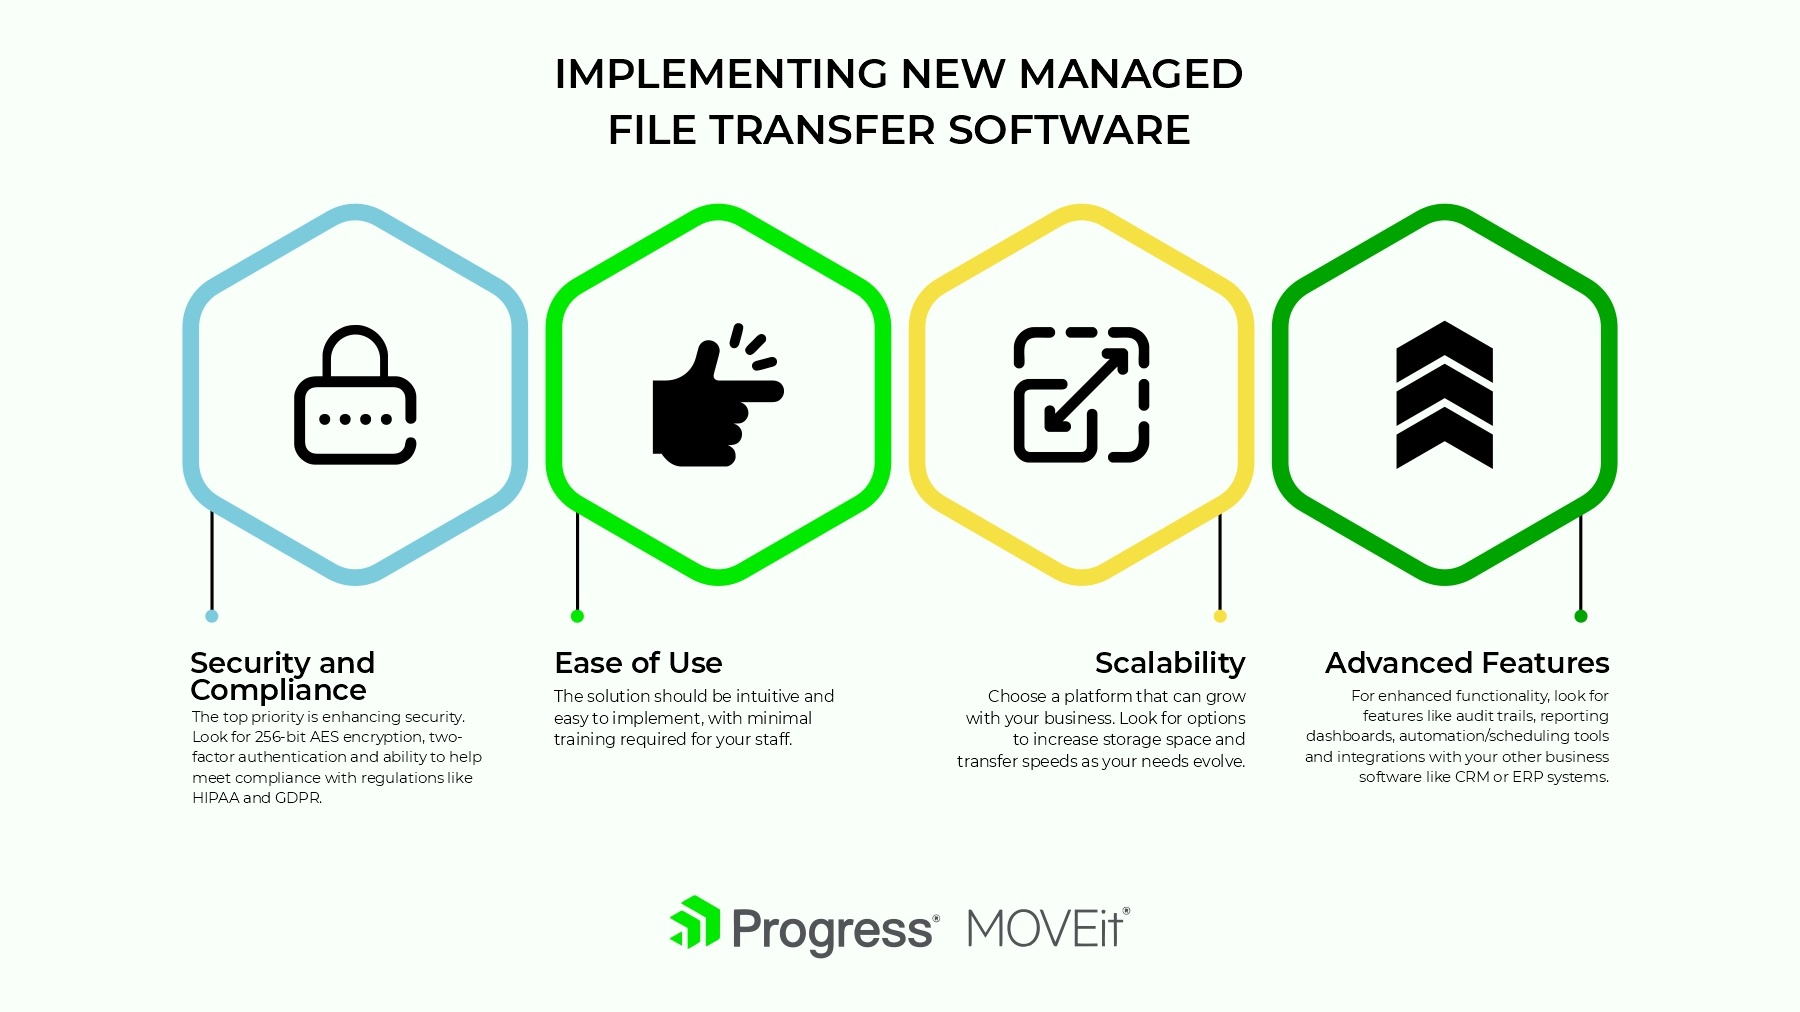 the picture presents the 4 main benefits of implementing new managed secure file transfer software - Security and Compliance, Ease of Use, Scalability and Advanced Features